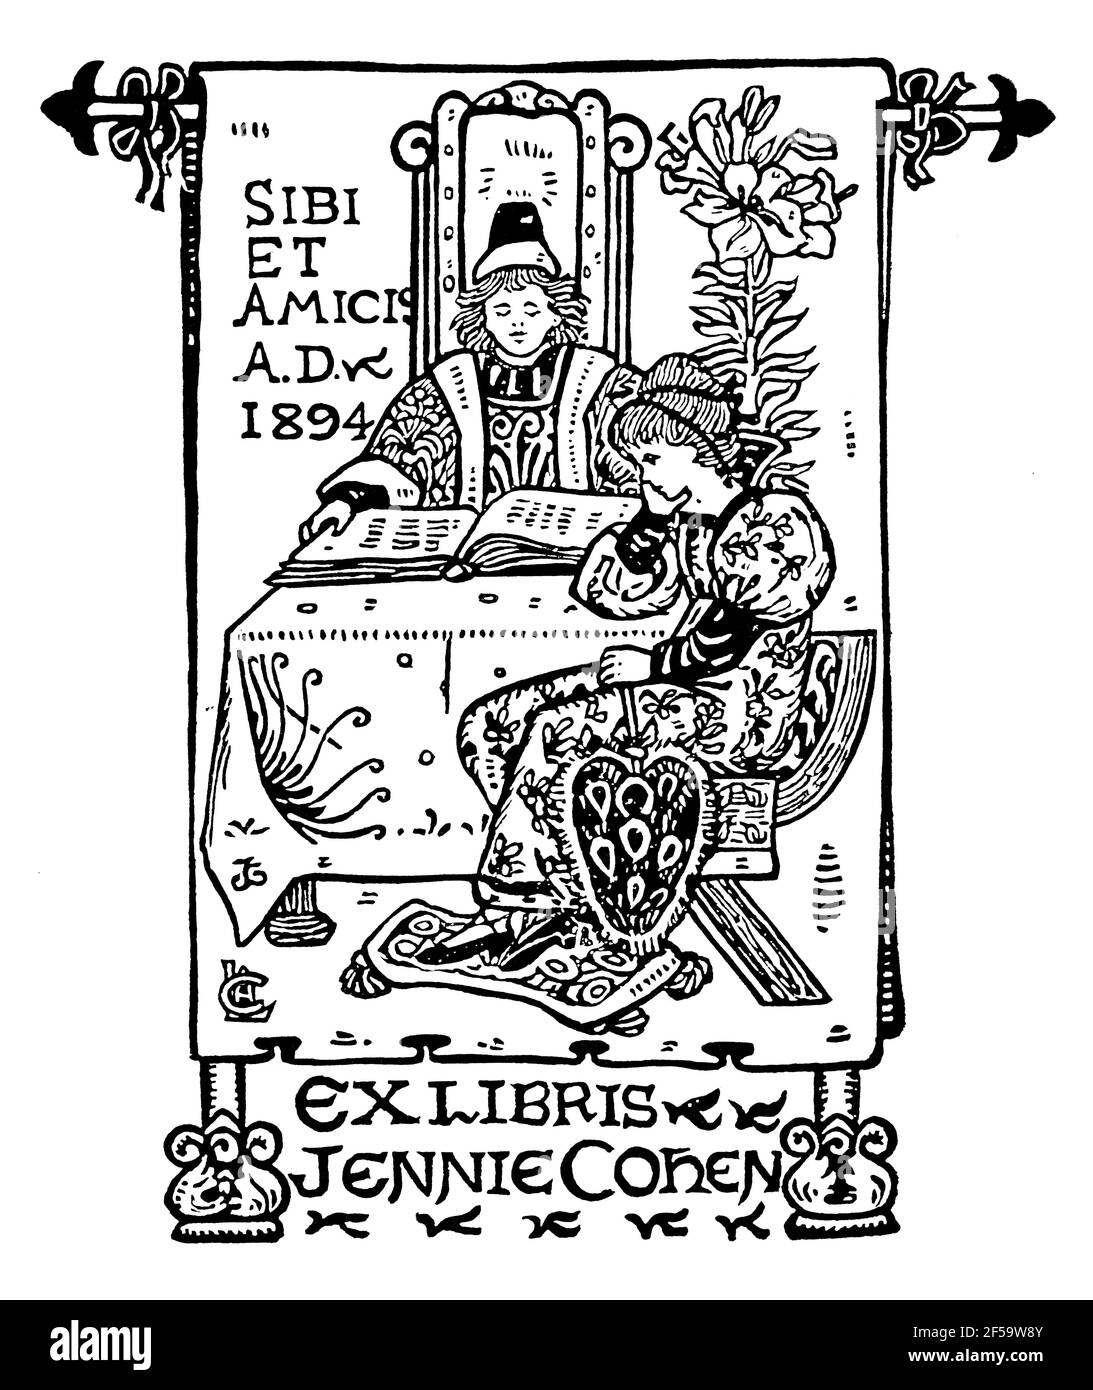 1994 Latin motto, Sibi et Amicis  (for them and their friends) man and woman in medieval costume bookplate for Jennie Cohen by Celia Levetus Stock Photo